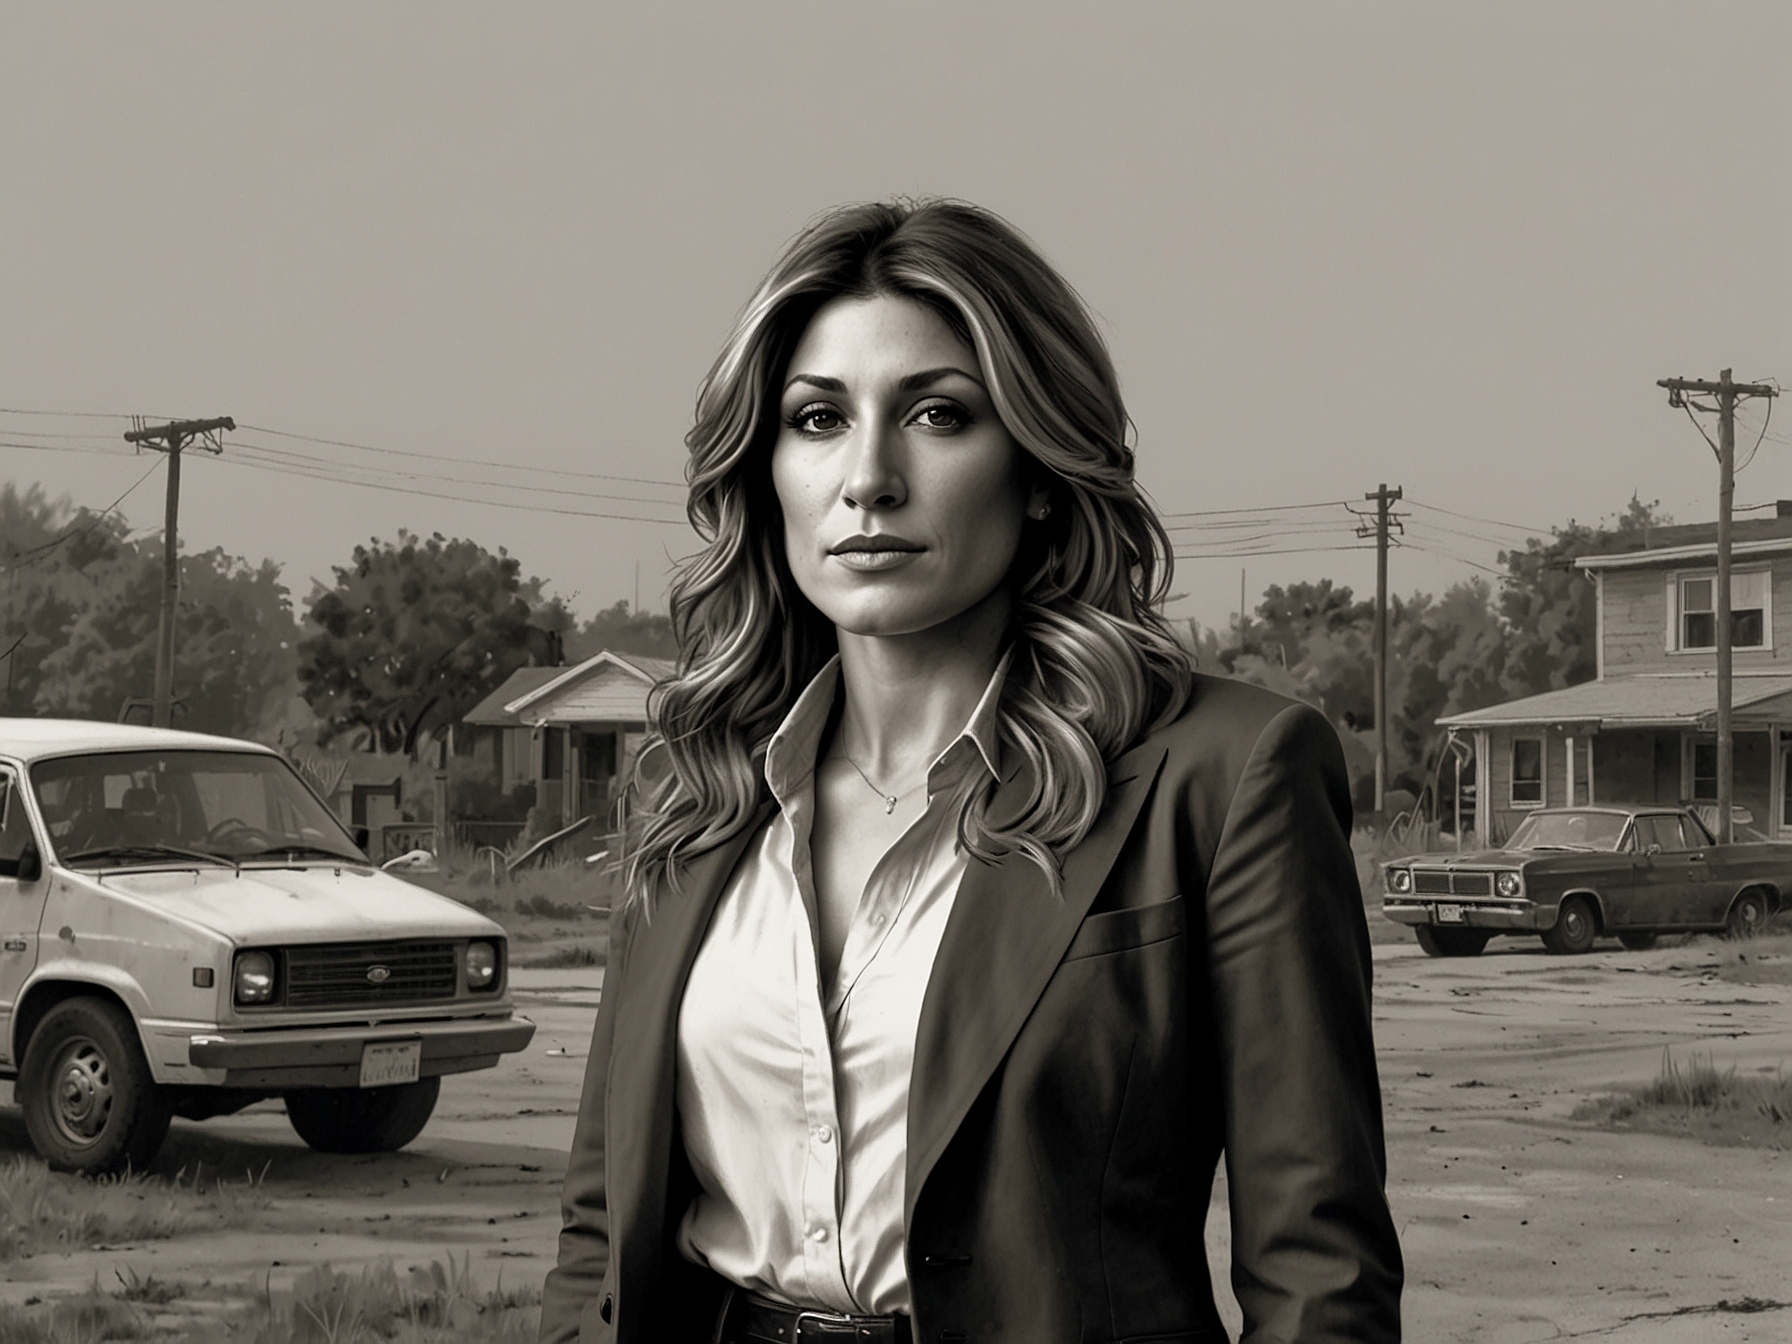 A confident Jennifer Esposito on the set of her new film 'Fresh Kills,' showcasing her resilience and growth as she takes on the role of director despite past adversities.